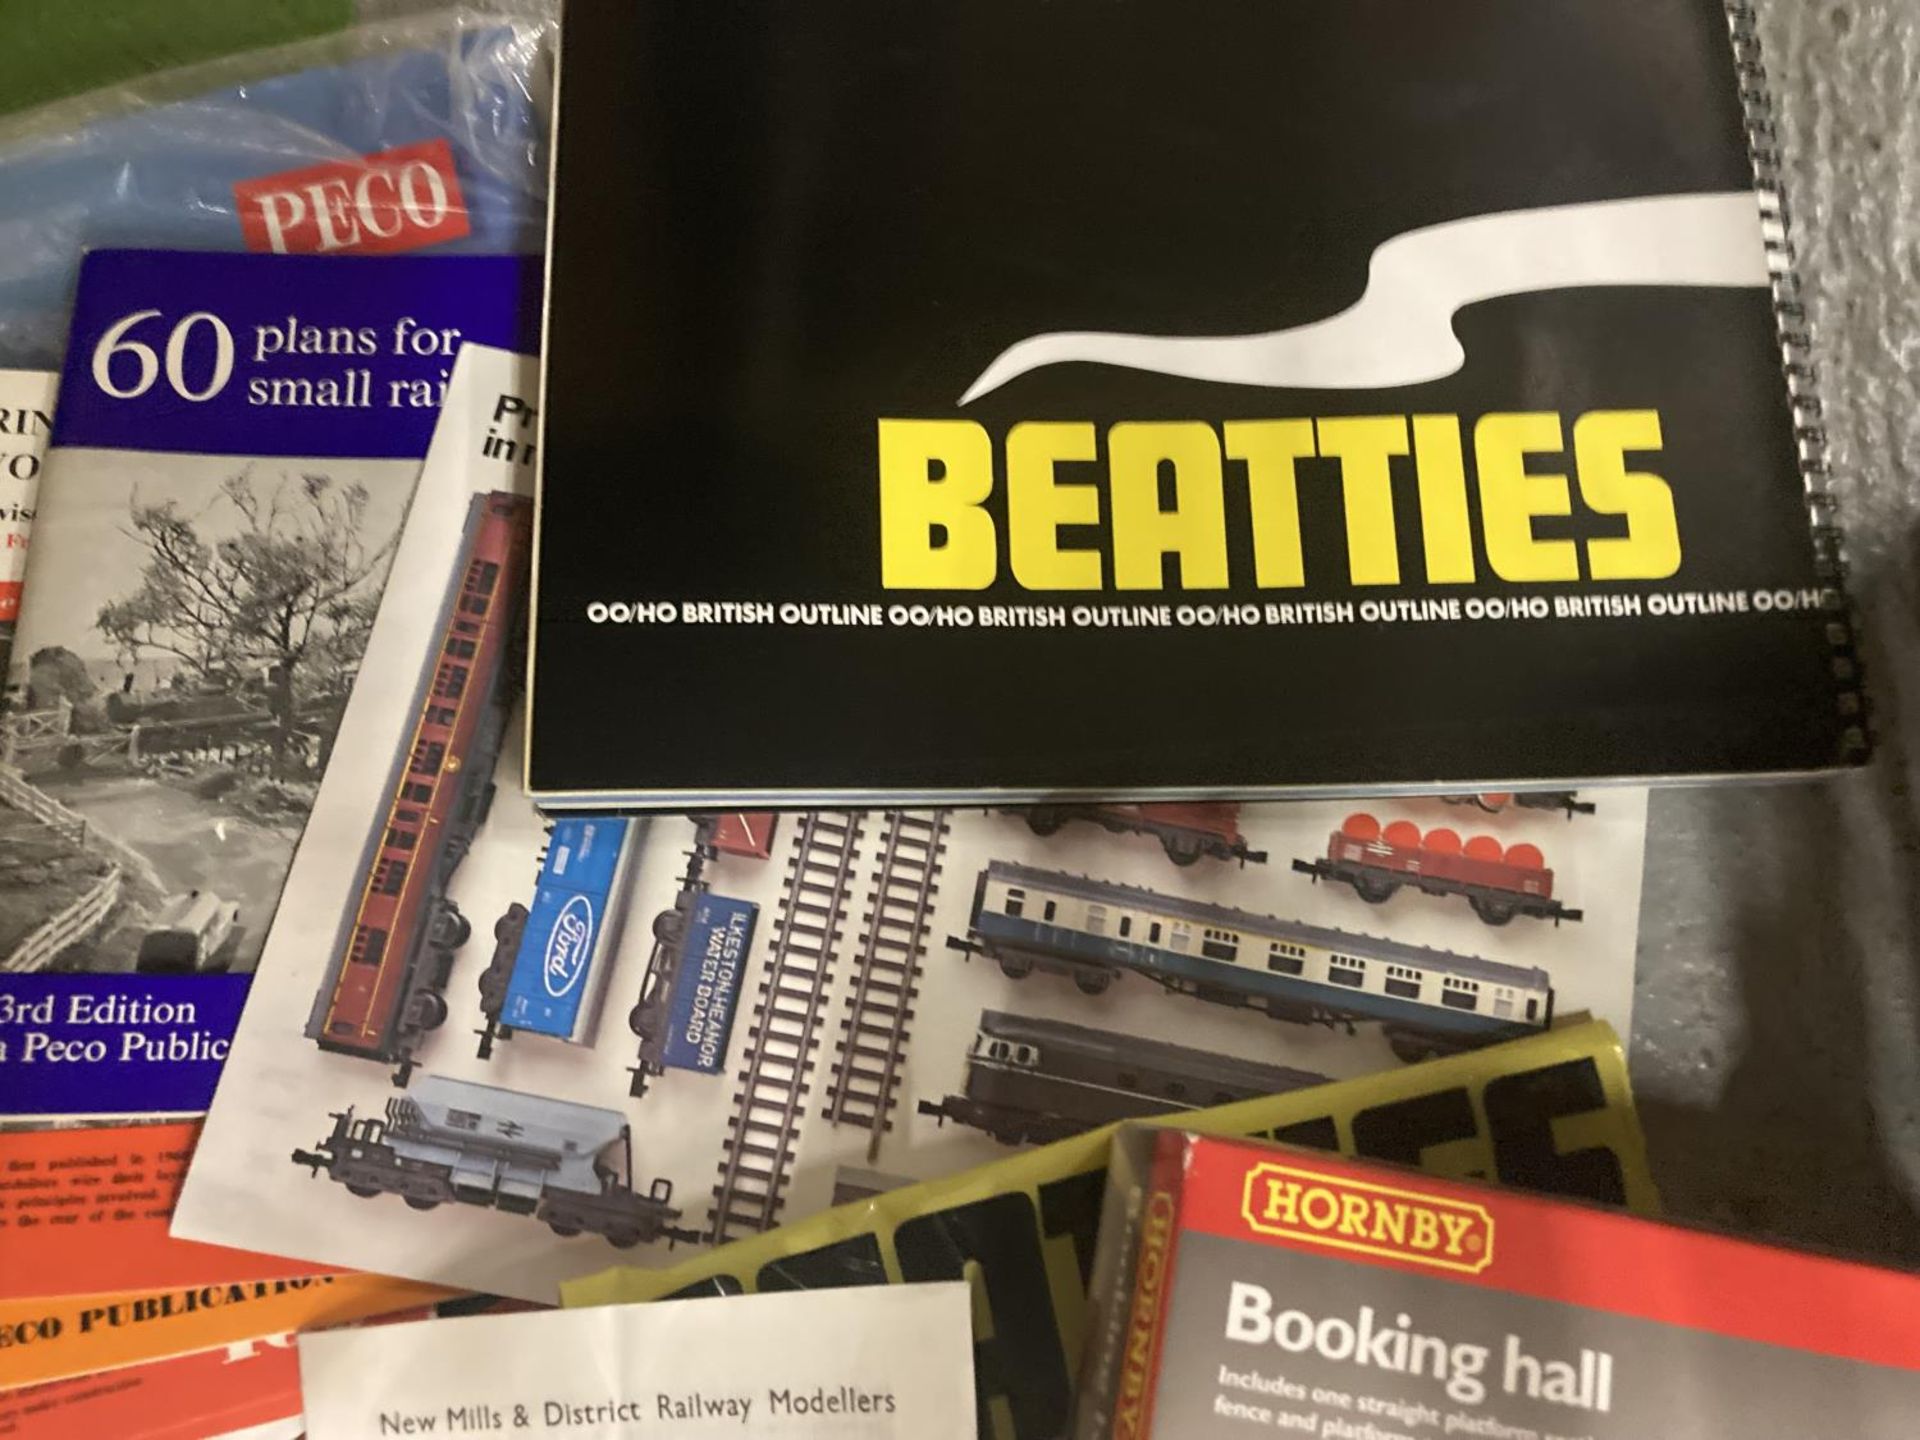 A BOXED HORNBY BOOKING HALL WITH SEVERAL PLAN MAGAZINES, CATALOGUES ETC - Image 4 of 5